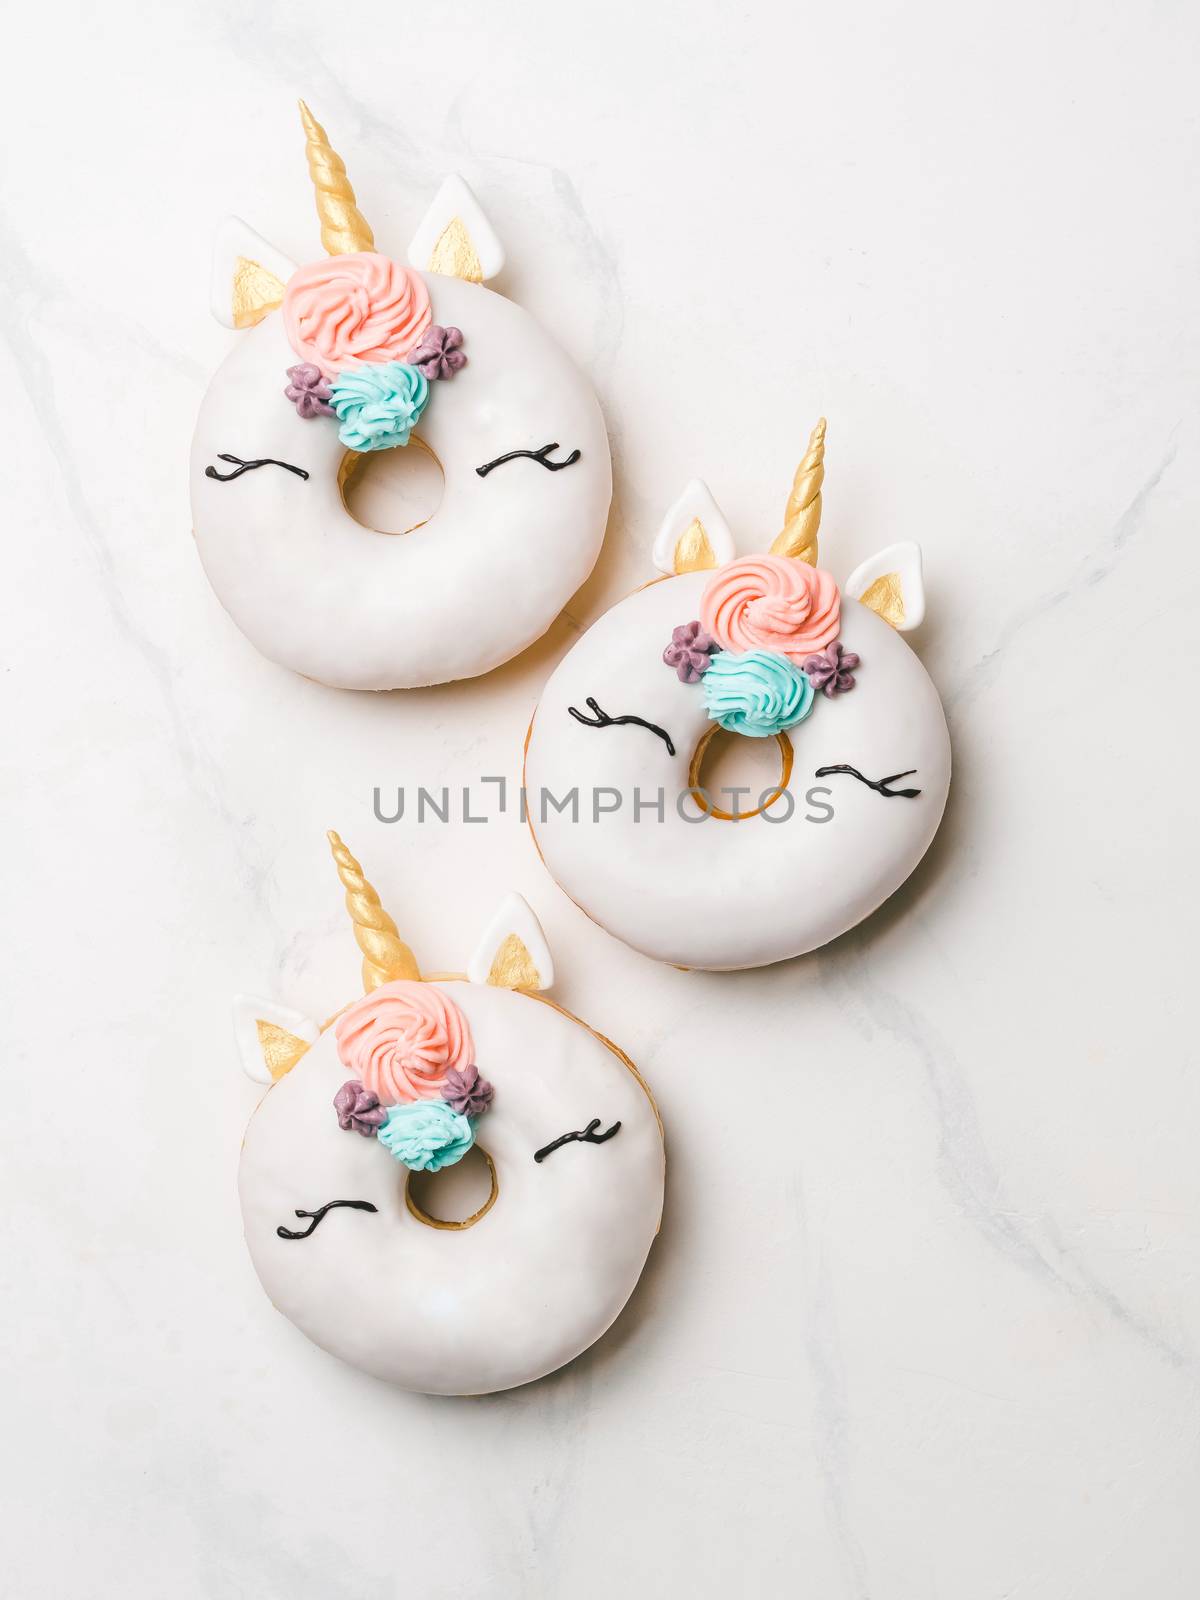 Unicorn donuts over white marble background. Trendy donut unicorn with white glaze. Top view or flat lay. Copy space for text. Vertical.